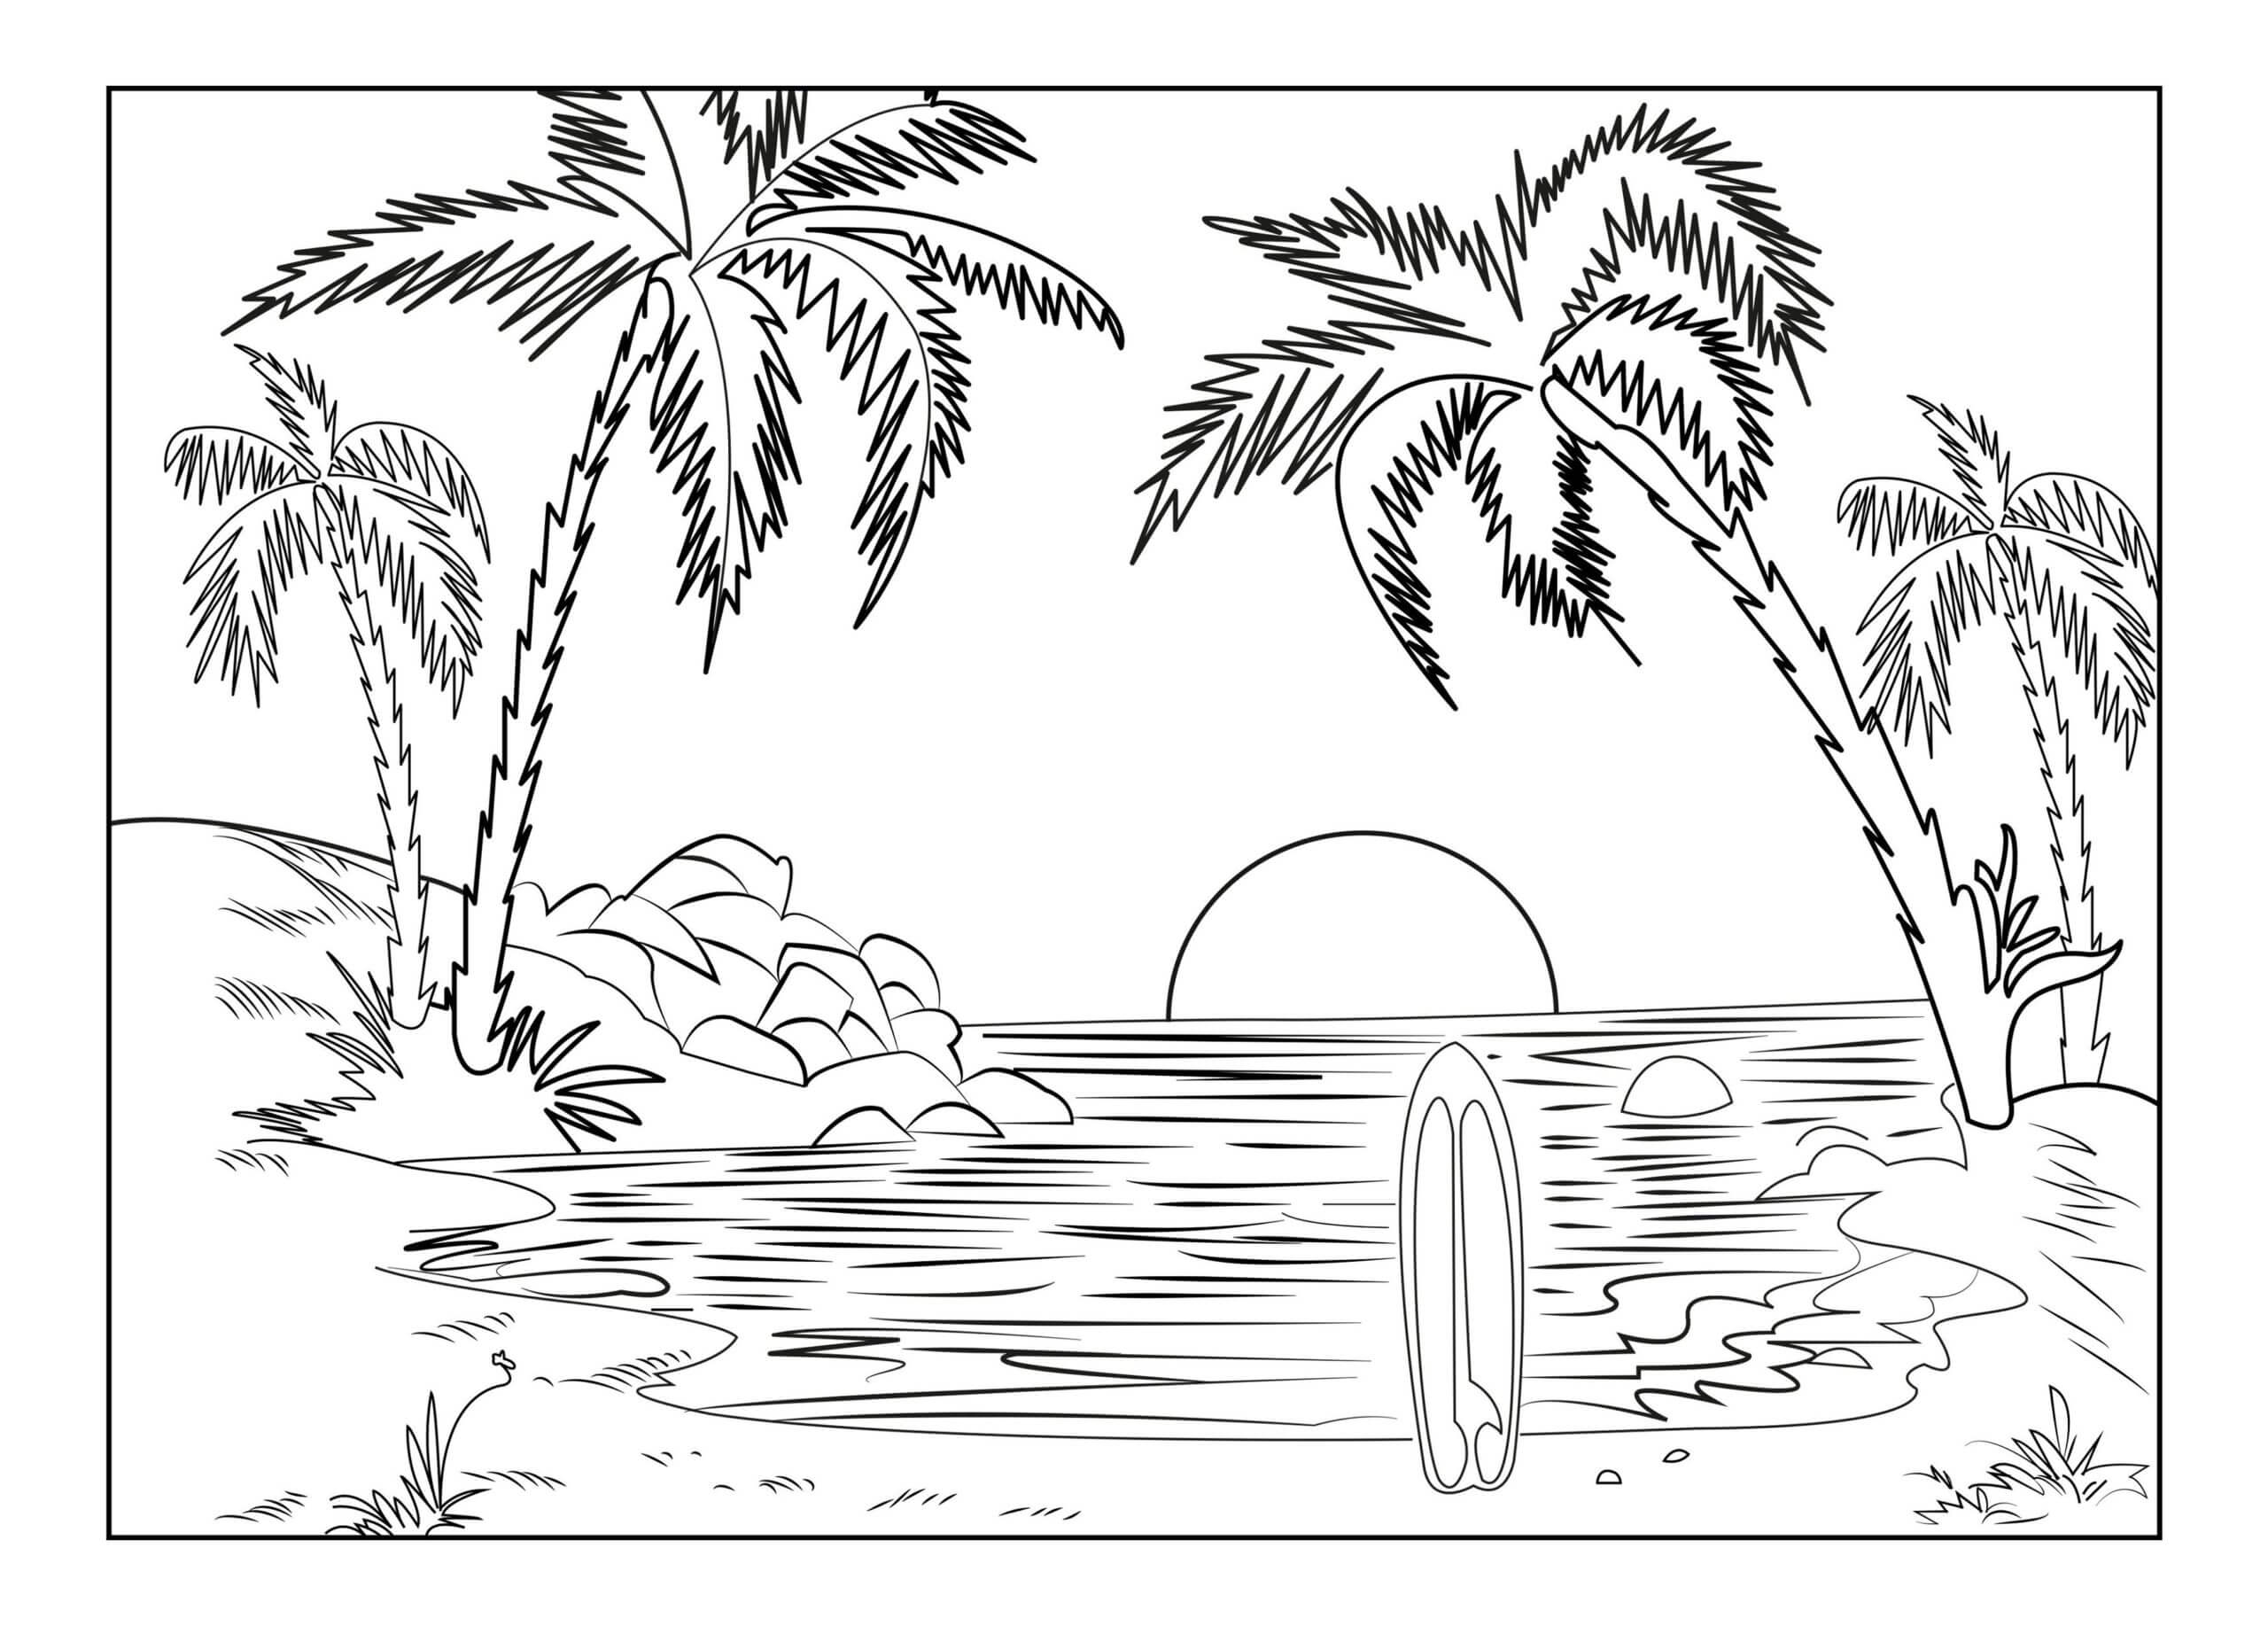 Sunset Landscape Coloring Page   Free Printable Coloring Pages for ...